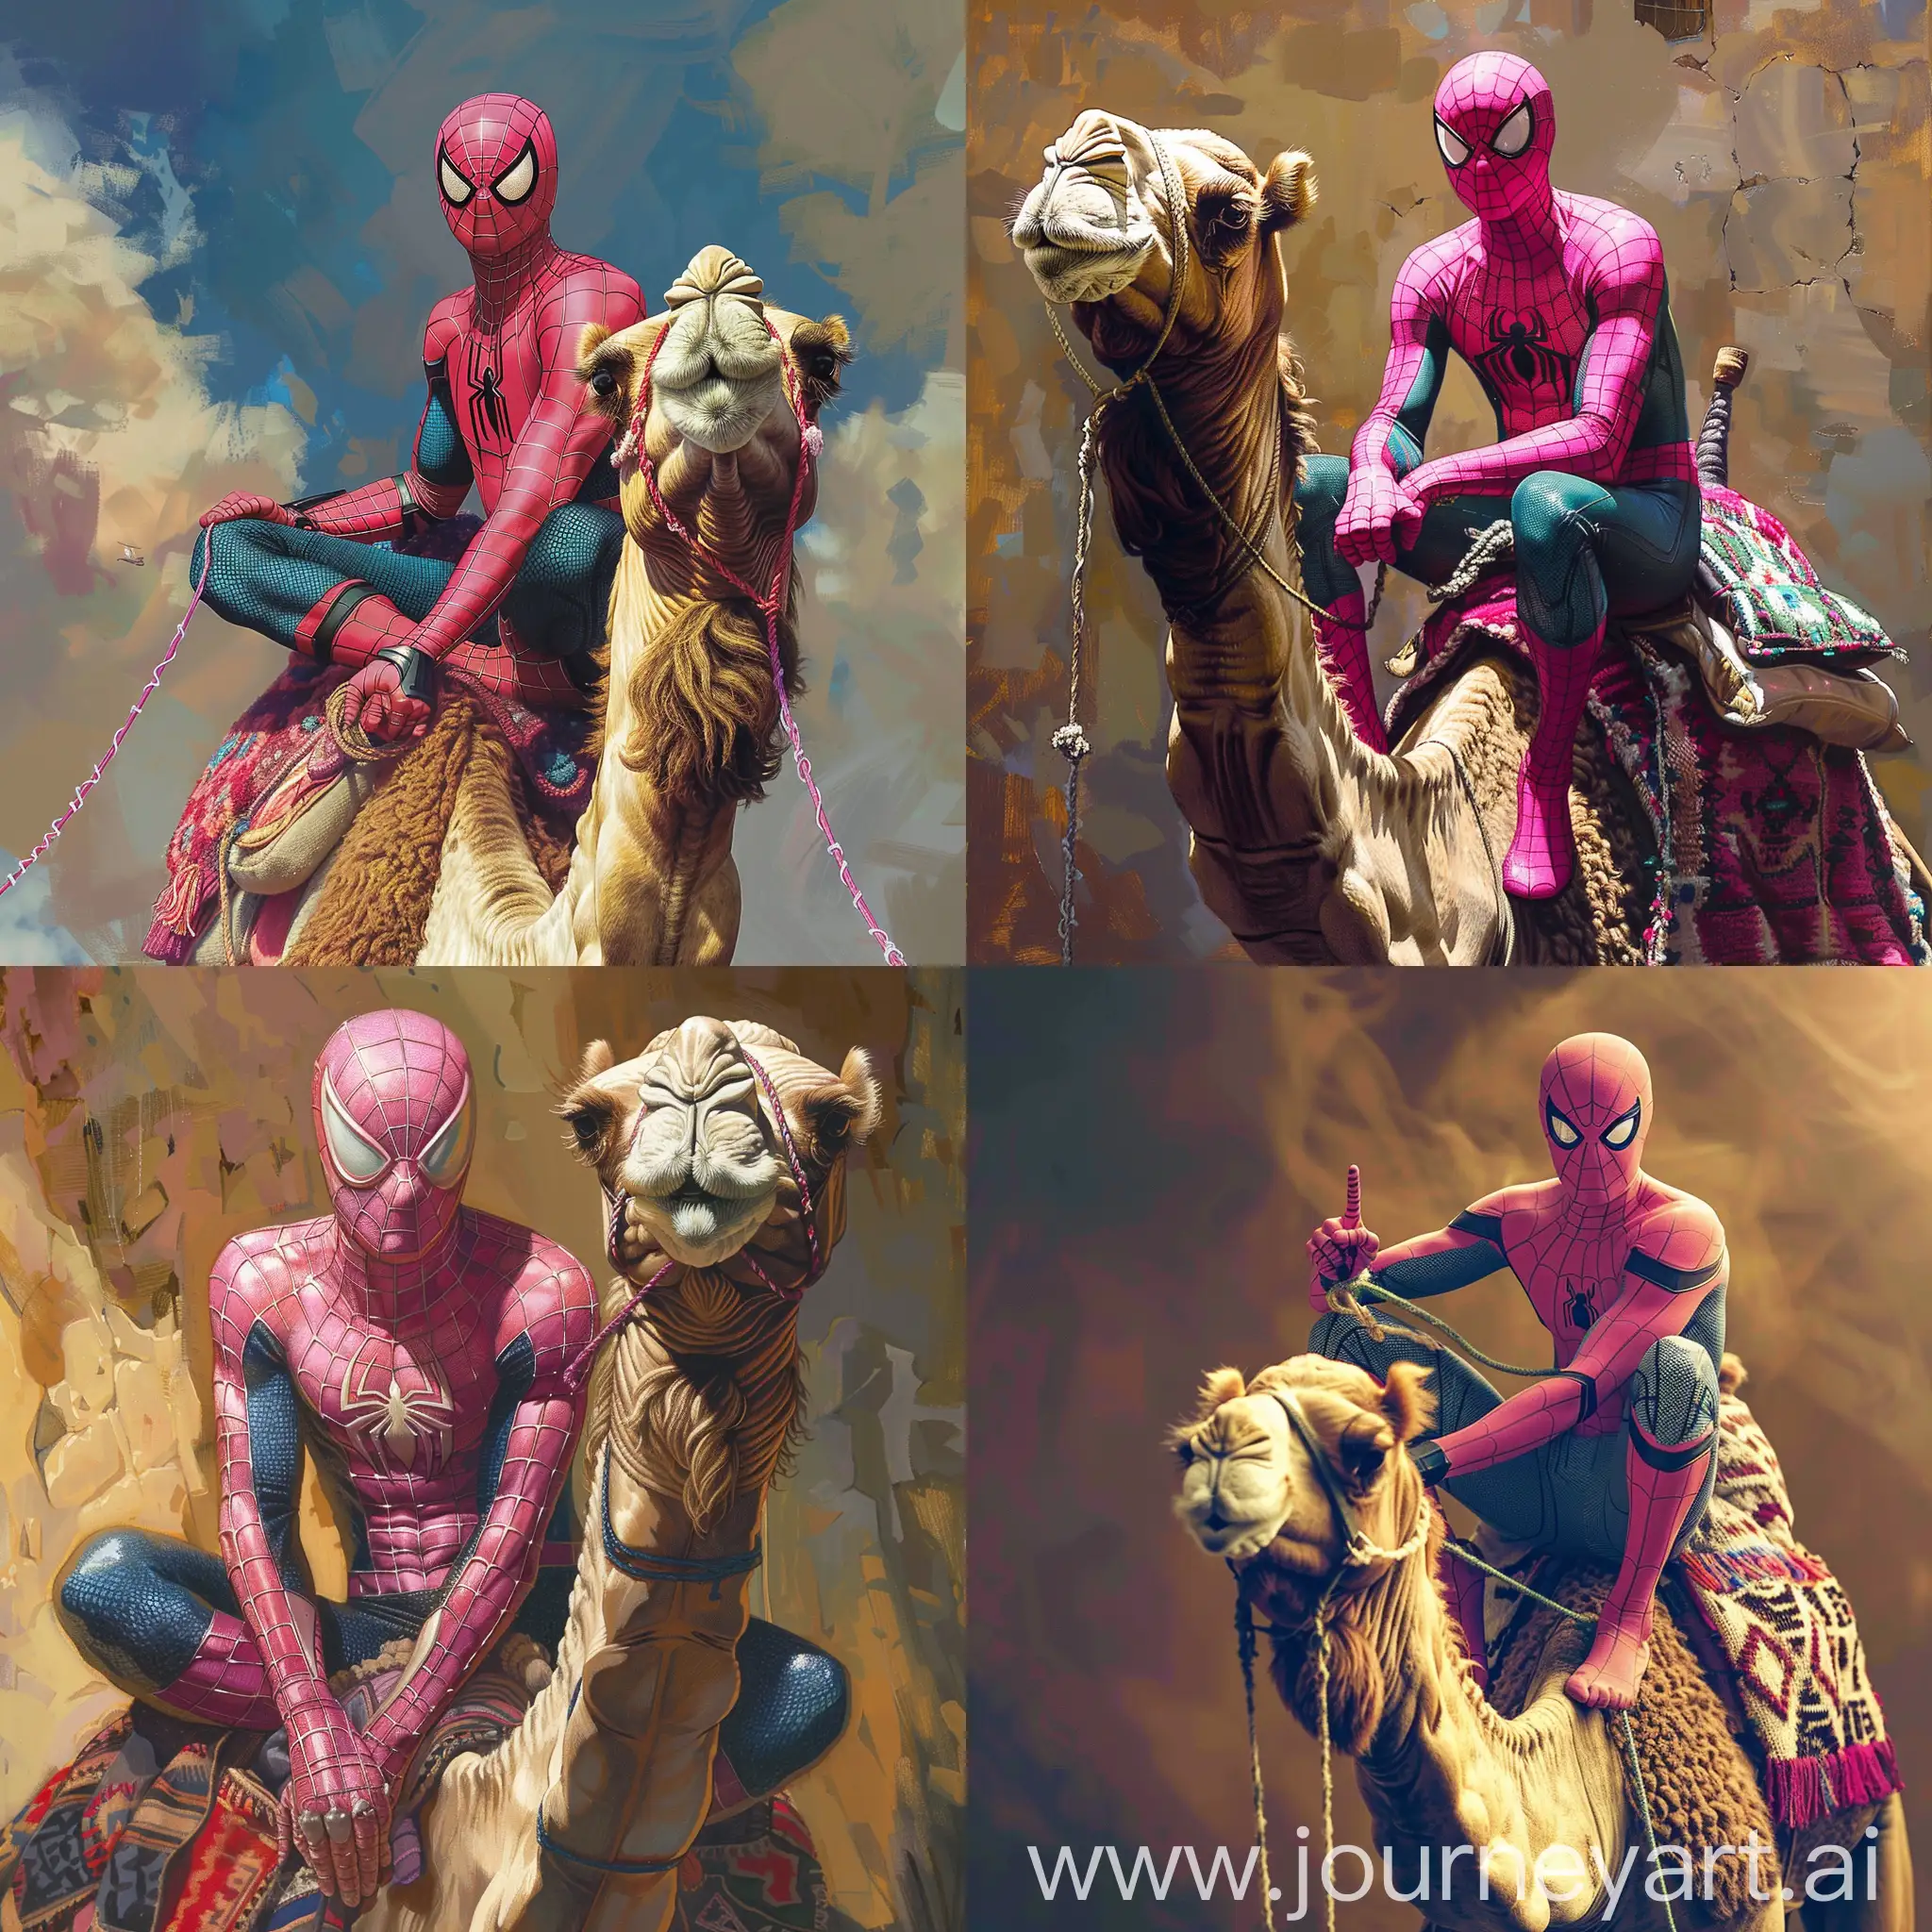 pink spider-man siting on the camel